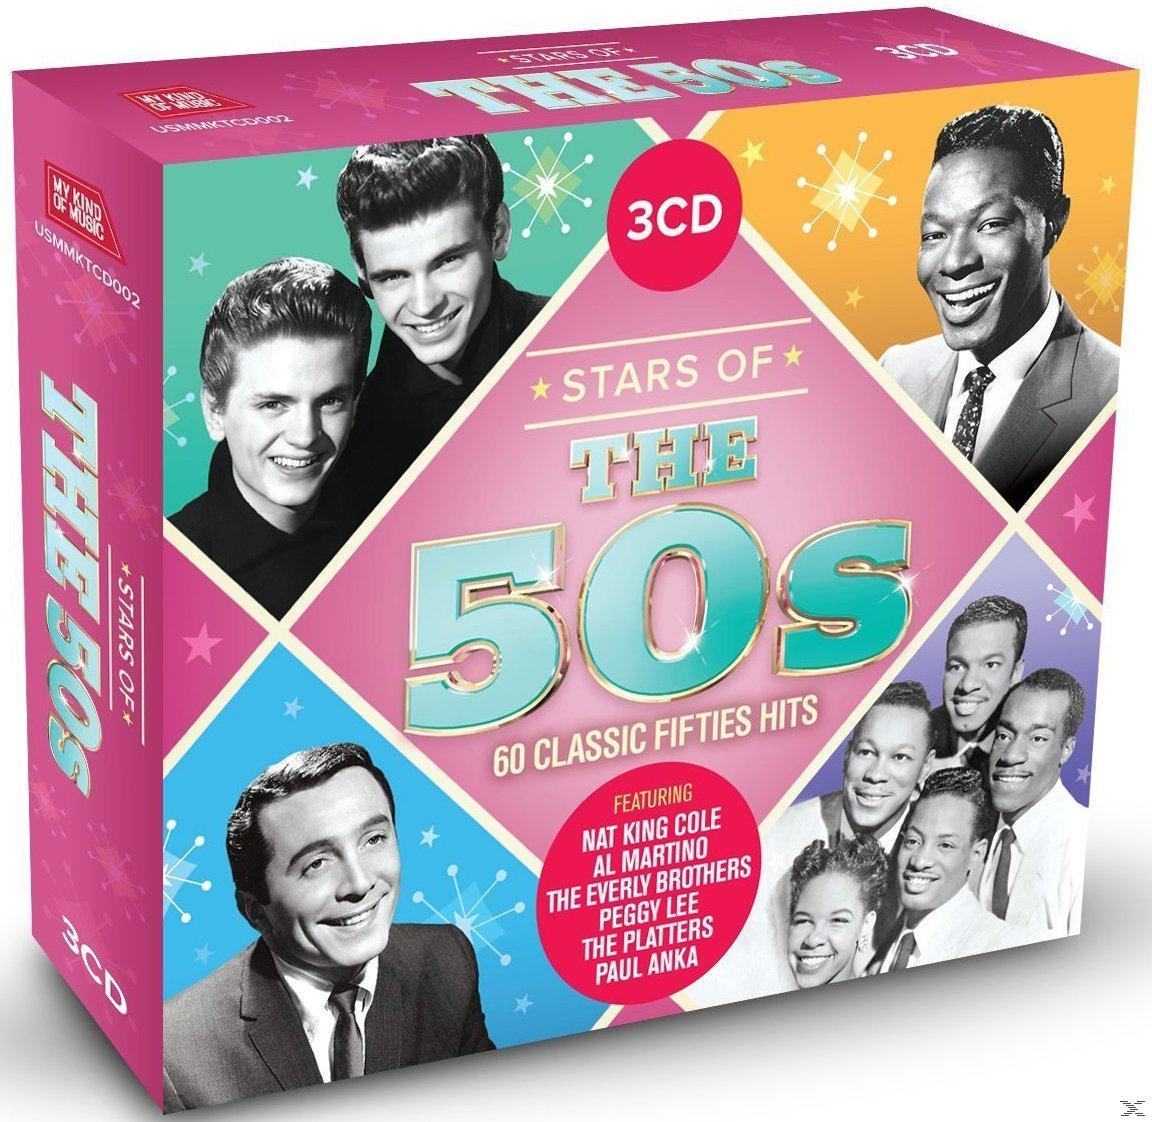 50s - Of VARIOUS Stars (CD) The -